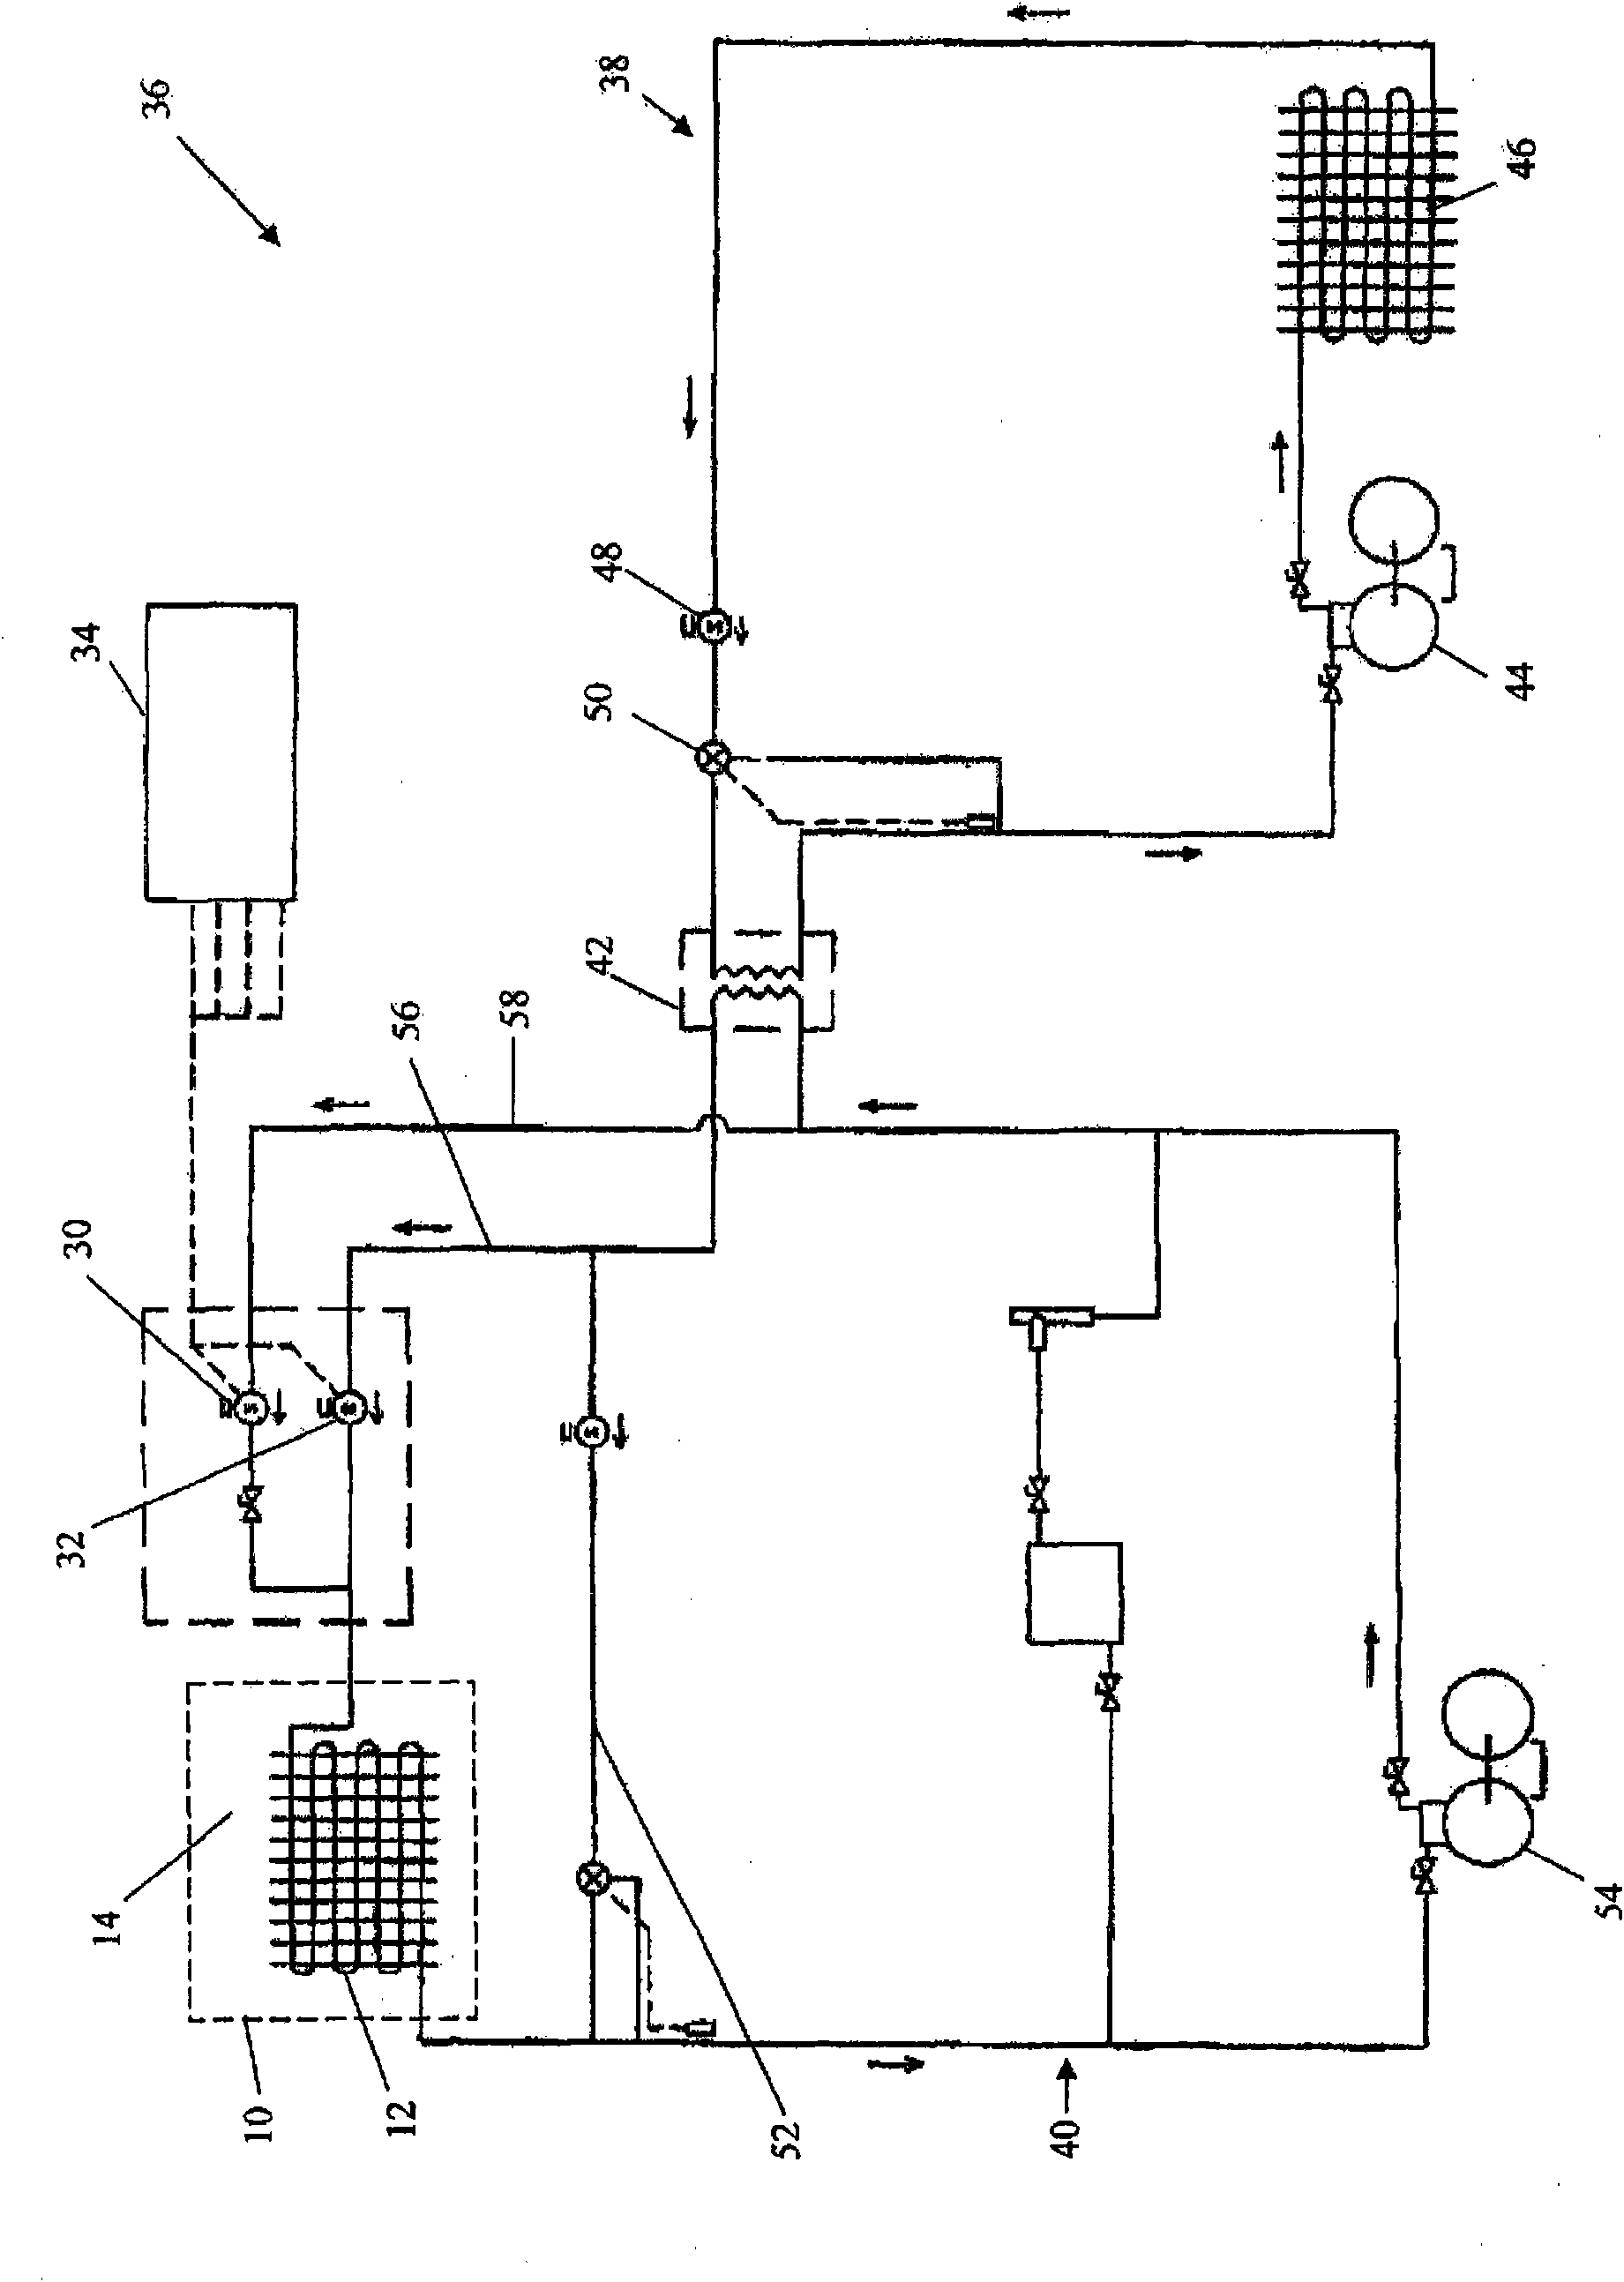 Test chamber with temperature and humidity control